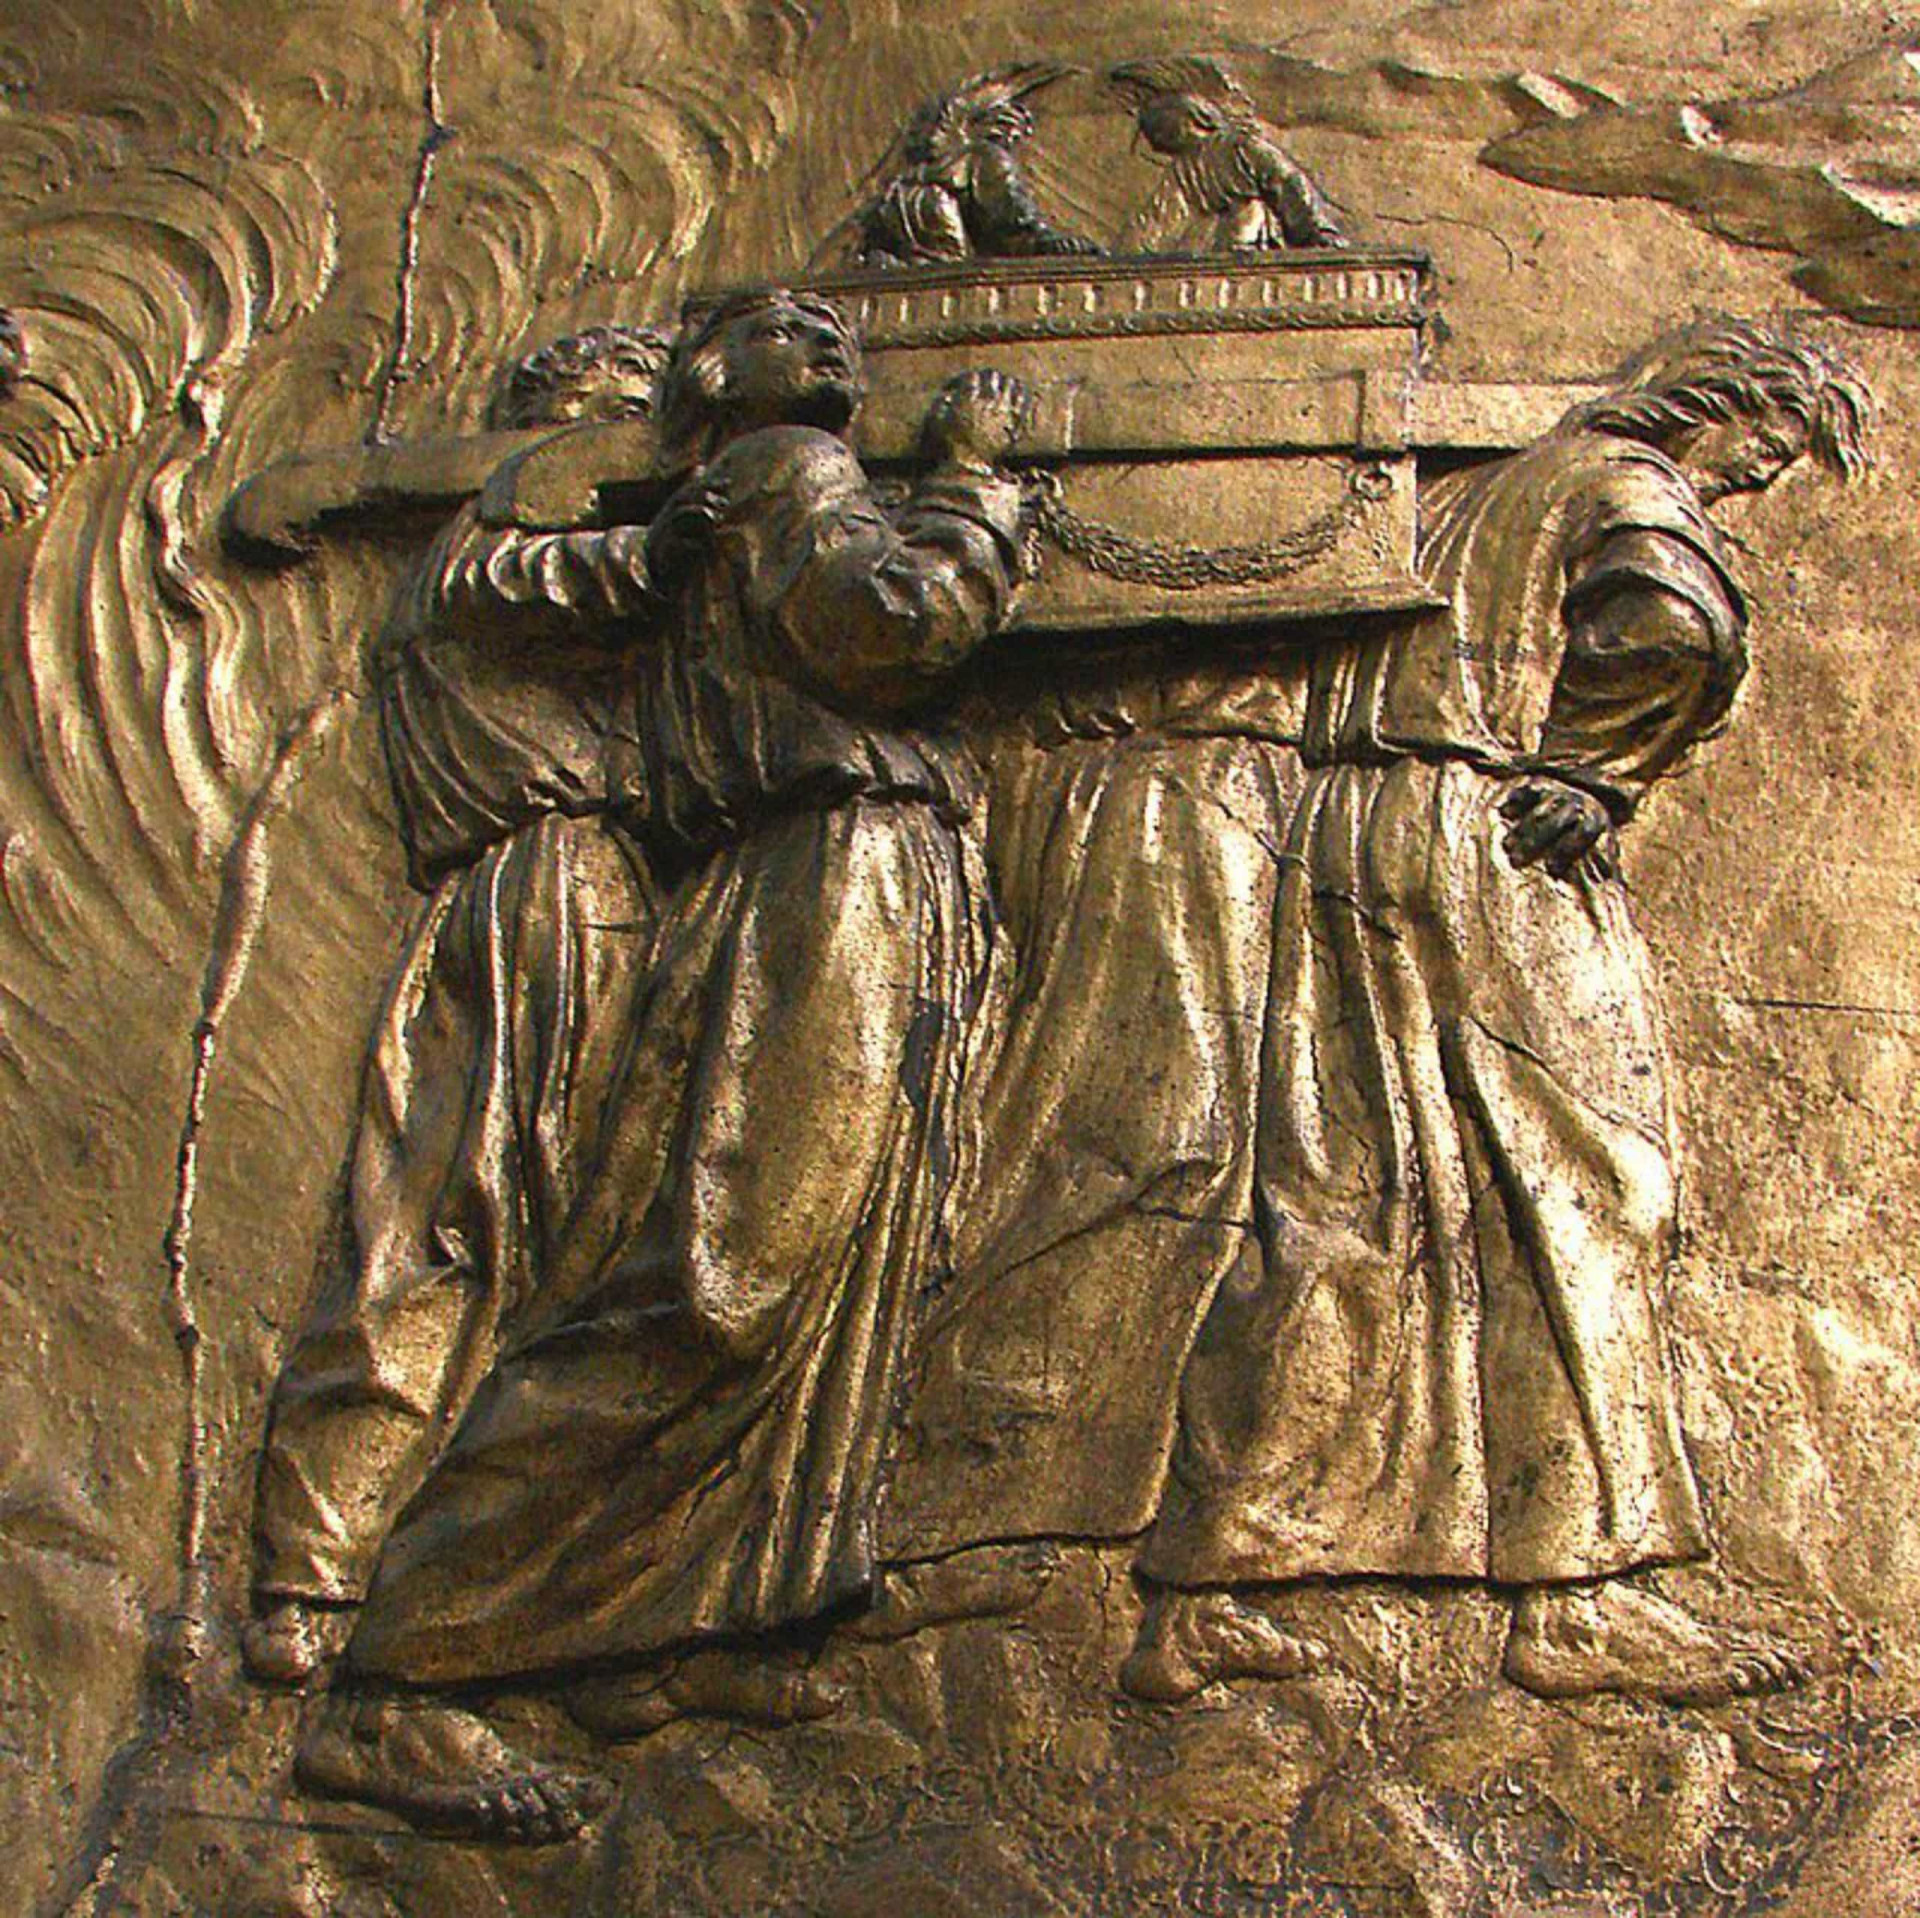 <p>French journalist Louis Charpentier, author of 'The Mysteries of Chartres Cathedral,' has made an assertion that the Ark was taken to Chartres Cathedral by the Knights Templar. Pictured is a gilded bas-relief of monks carrying the allusive chest at Auch Cathedral in France.</p><p><a href="https://www.msn.com/en-ph/community/channel/vid-7xx8mnucu55yw63we9va2gwr7uihbxwc68fxqp25x6tg4ftibpra?cvid=94631541bc0f4f89bfd59158d696ad7e">Follow us and access great exclusive content every day</a></p>